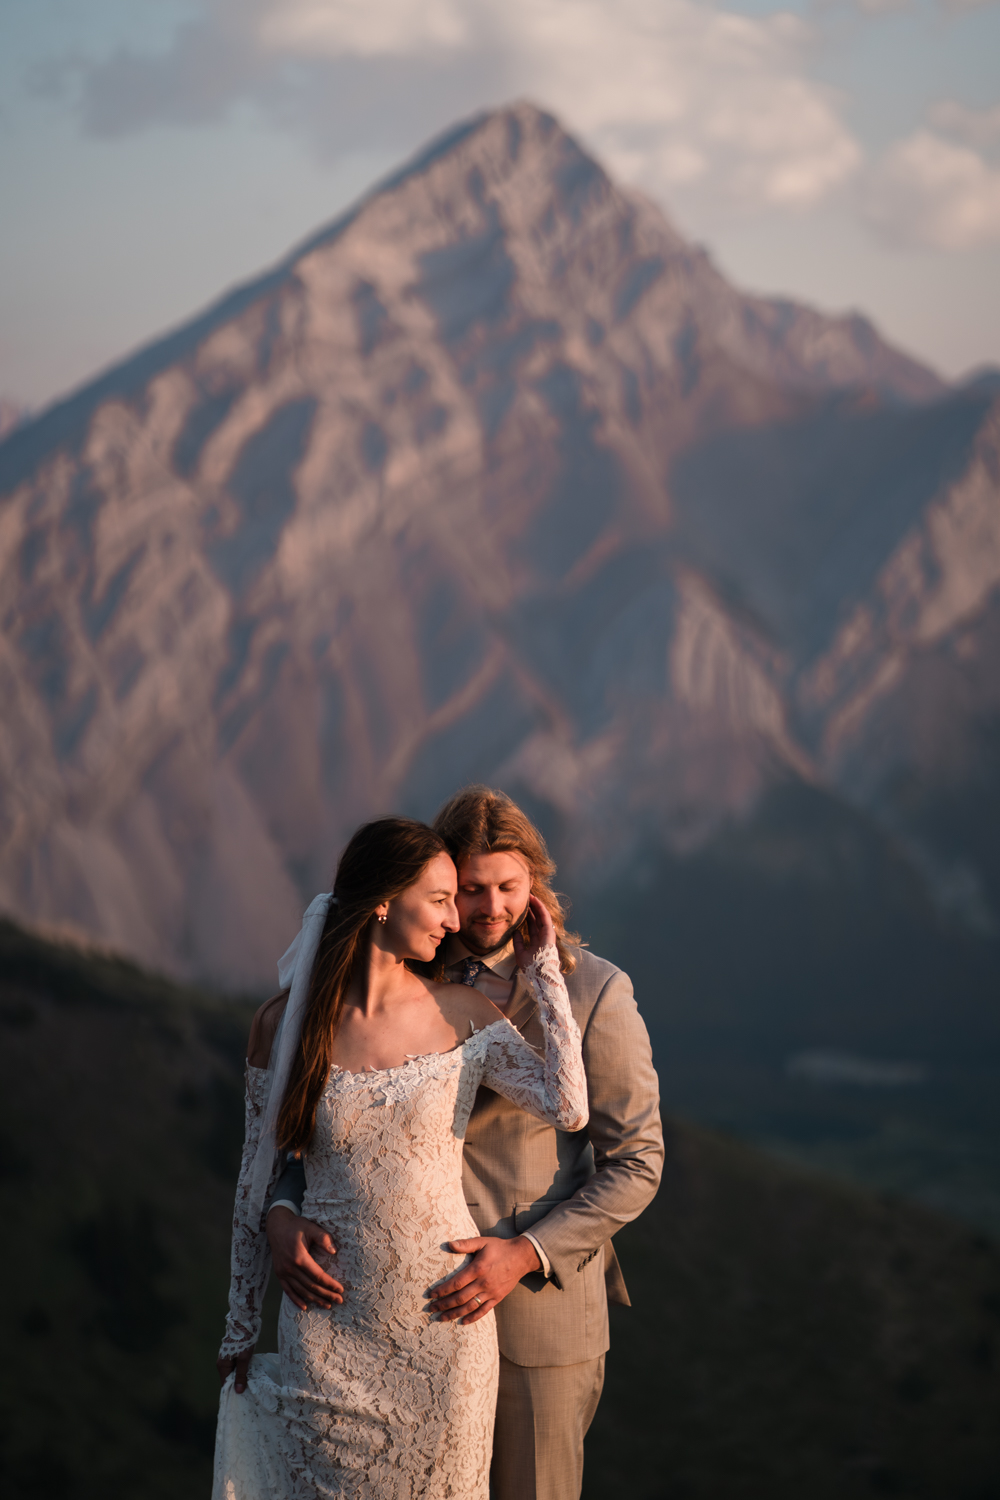 The warm glow of the sunrise illuminating a couple's love during their Kananaskis backcountry camping elopement